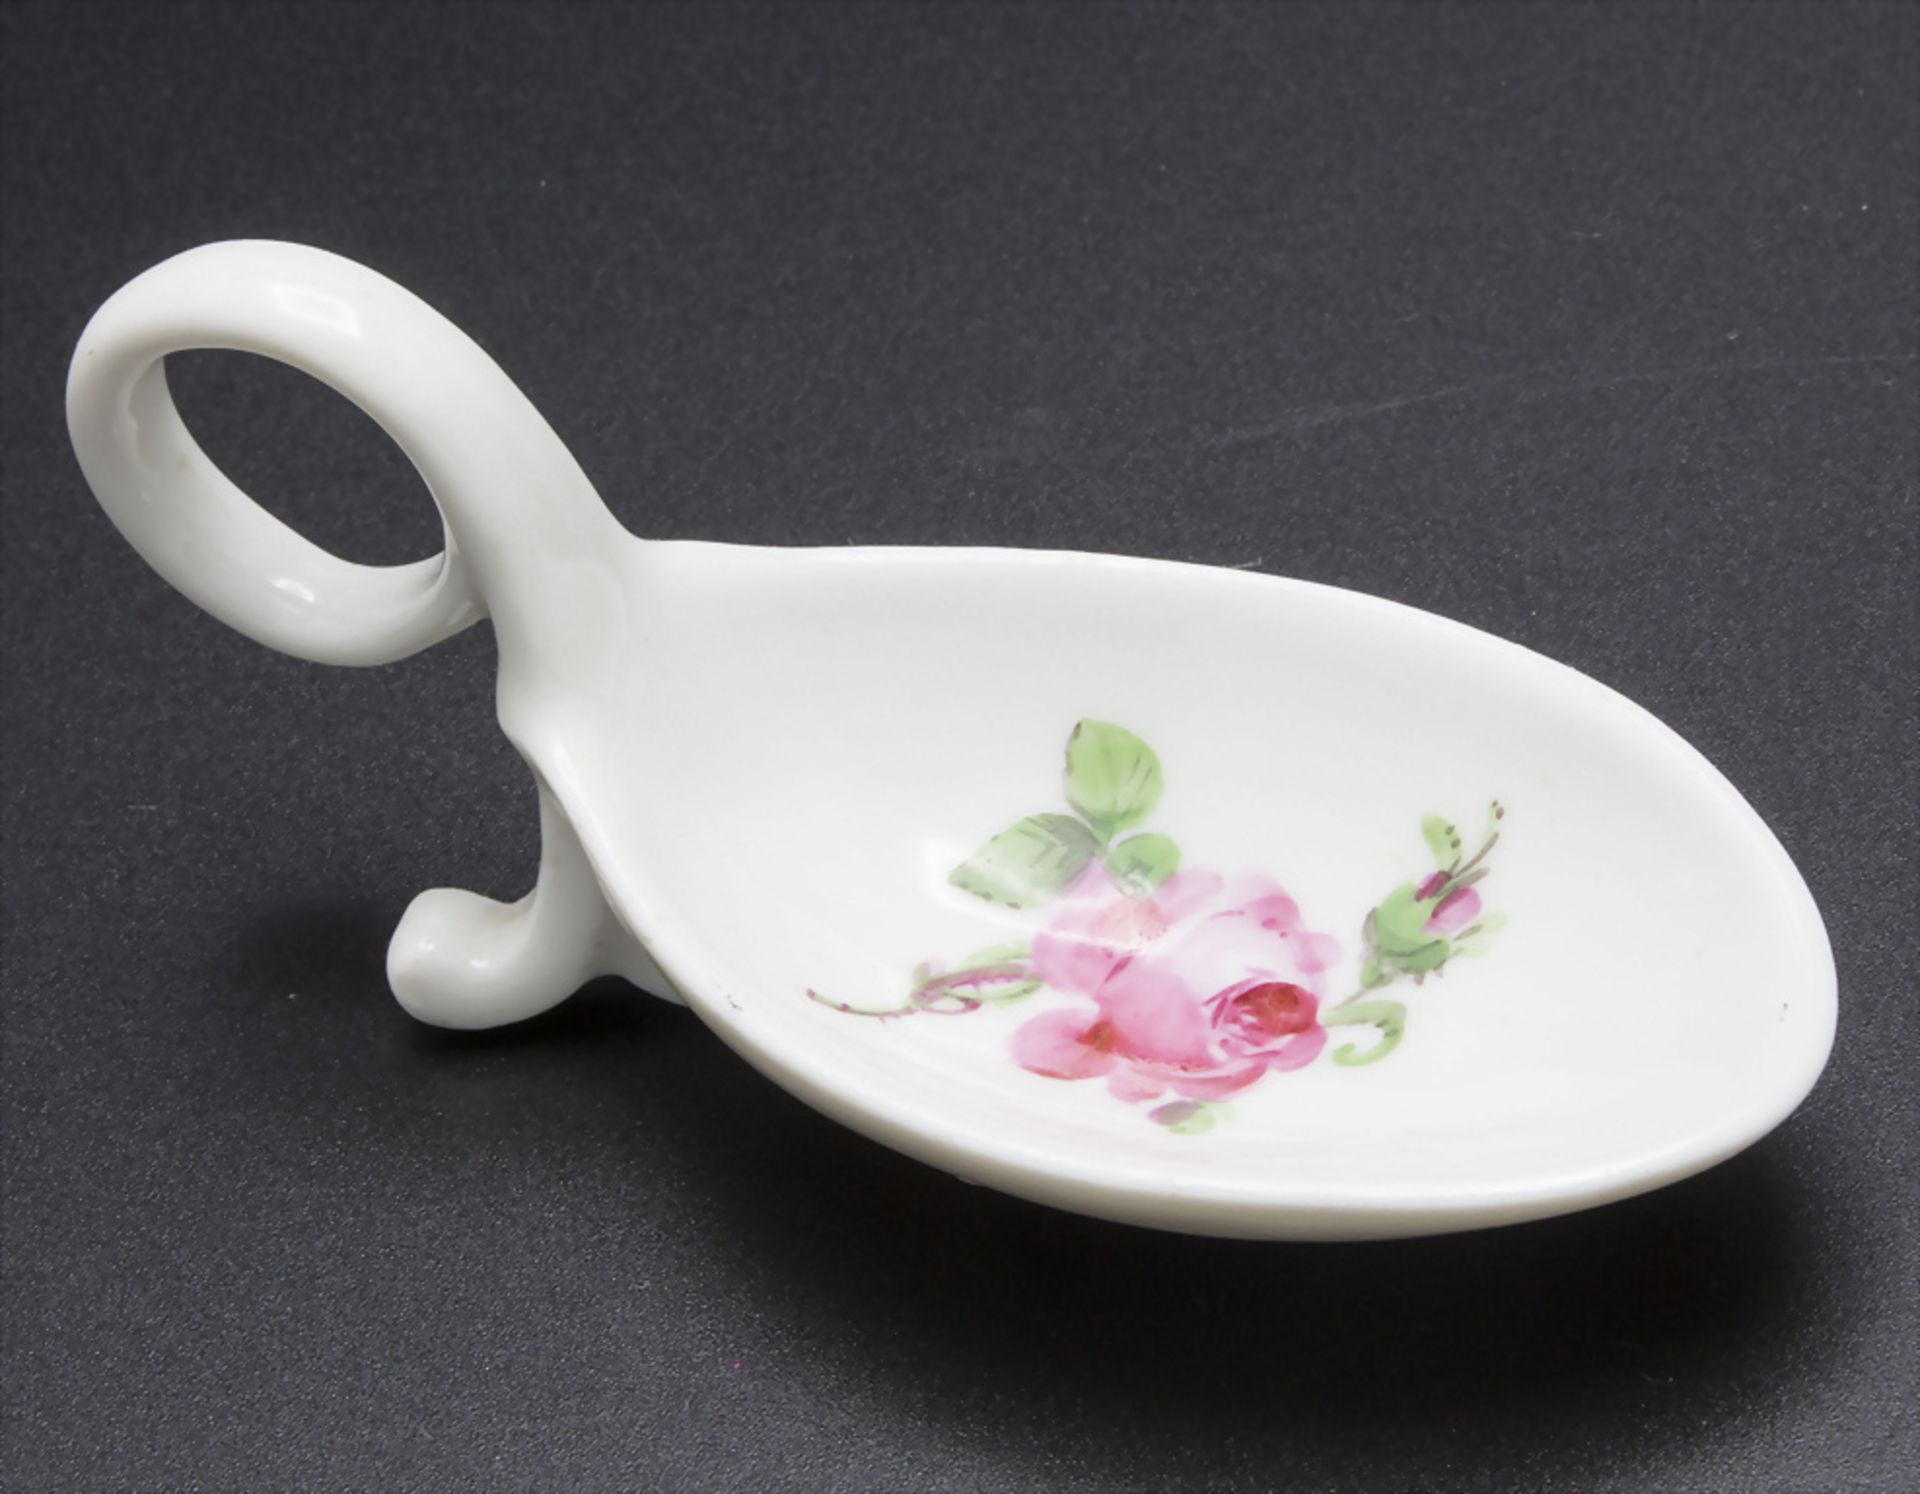 Seltener Löffel 'Rote Rose' / A rare spoon with rose pattern, Meissen, Mitte 19. Jh.